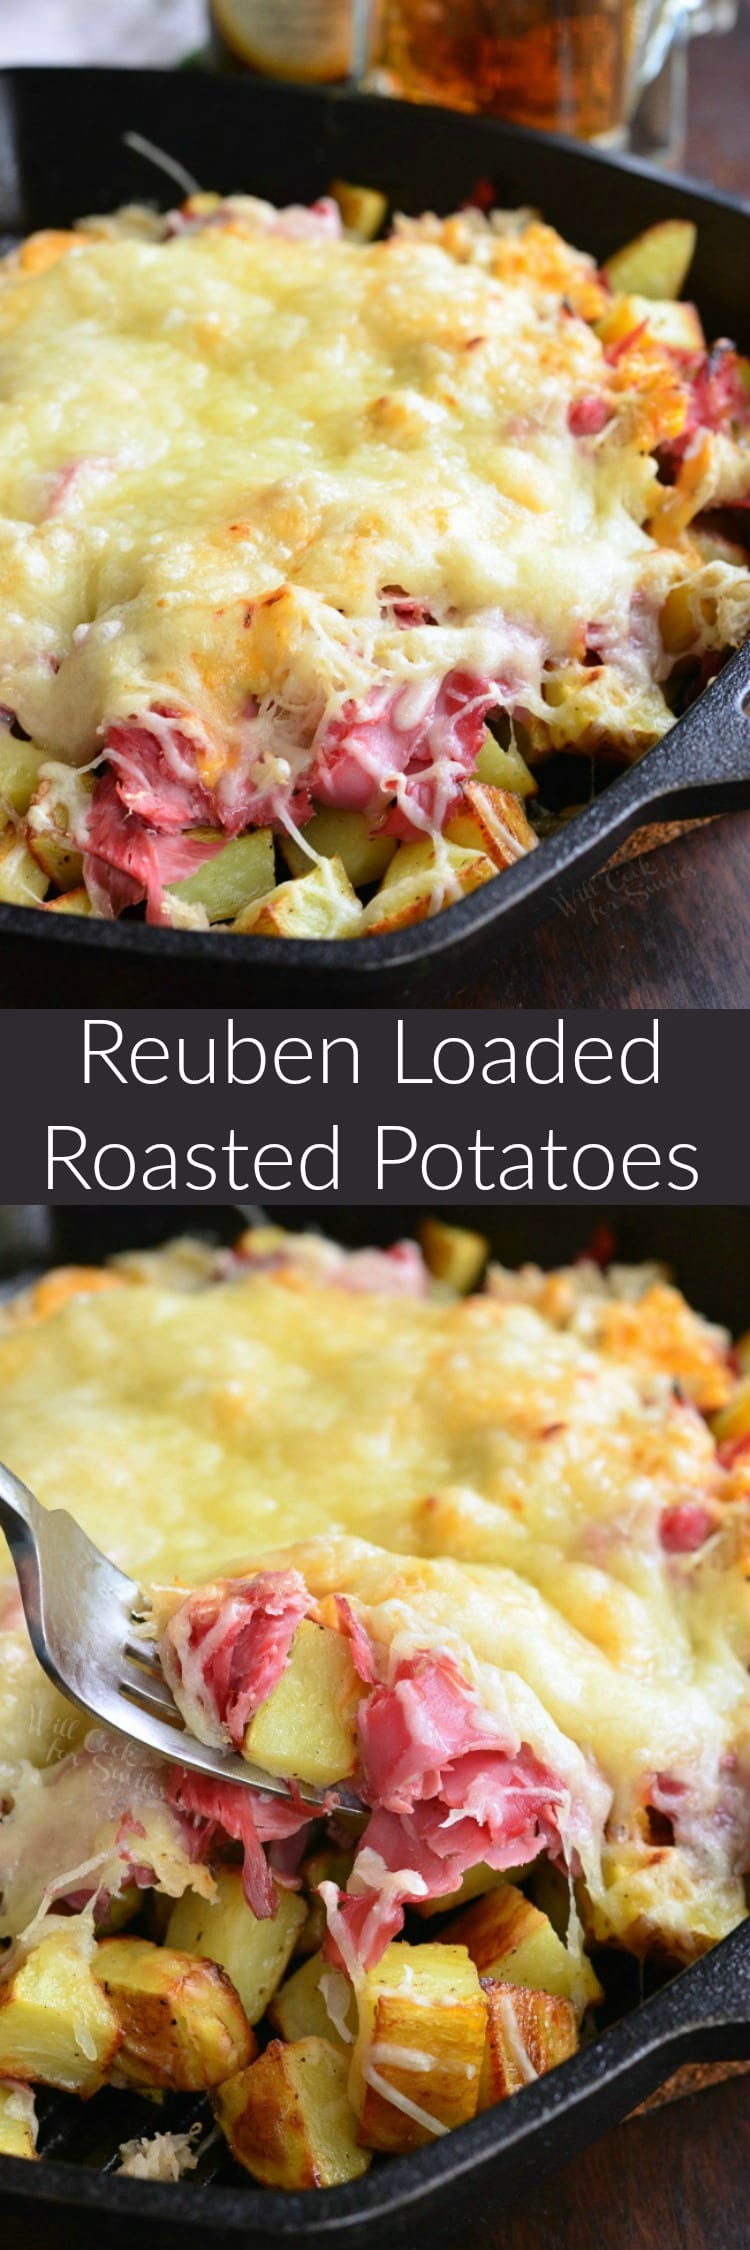 collage of Reuben Loaded Roasted Potatoes with cheese on top in a cast iron skillet bottom photo Reuben Loaded Roasted Potatoes with cheese on top in a cast iron skillet with a fork